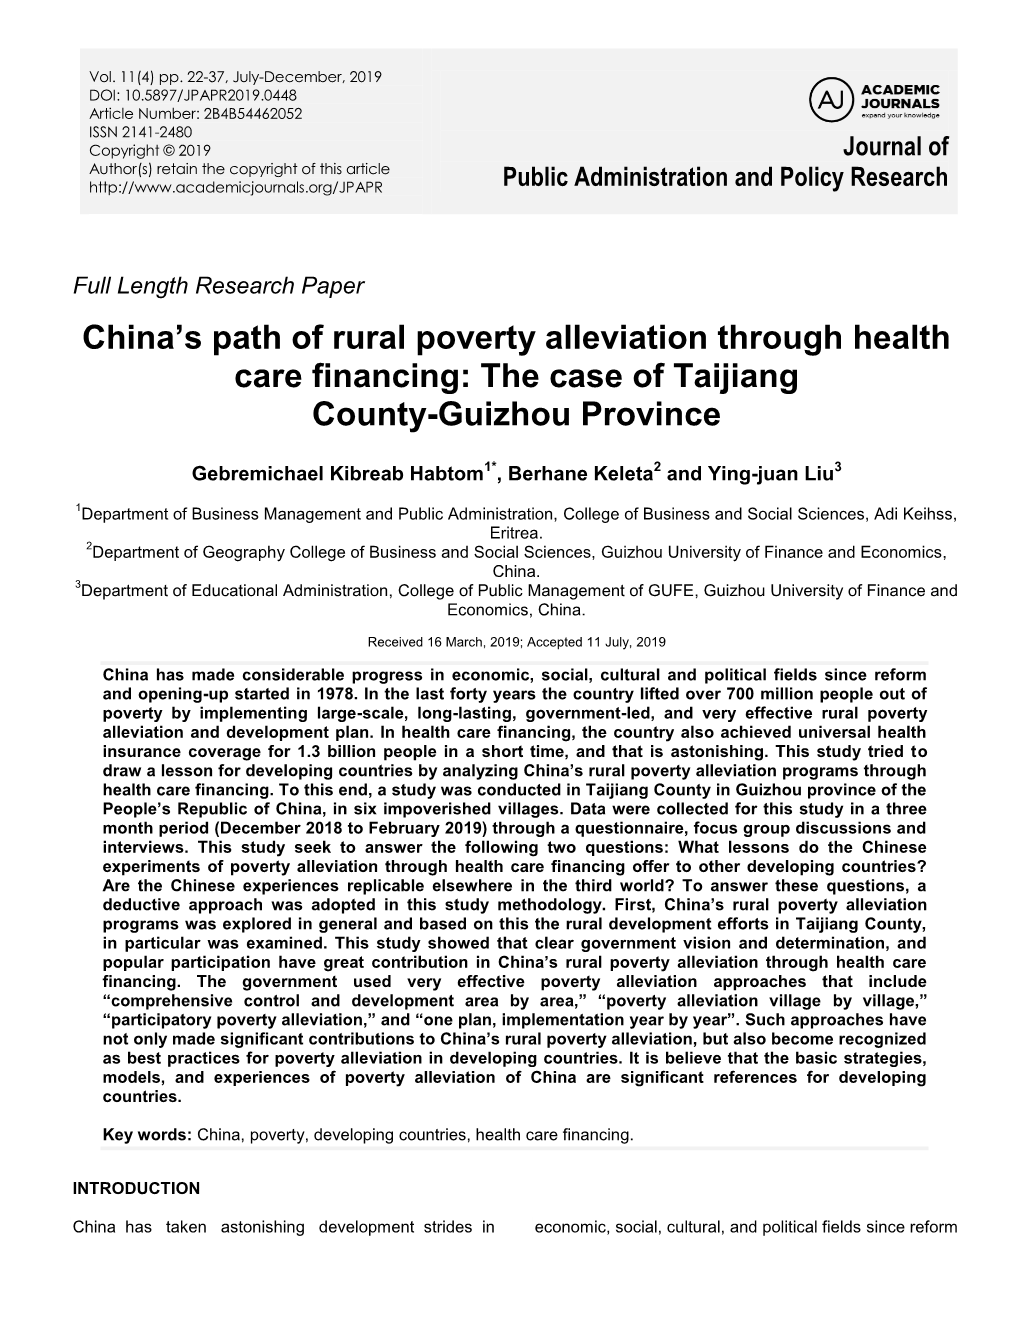 China's Path of Rural Poverty Alleviation Through Health Care